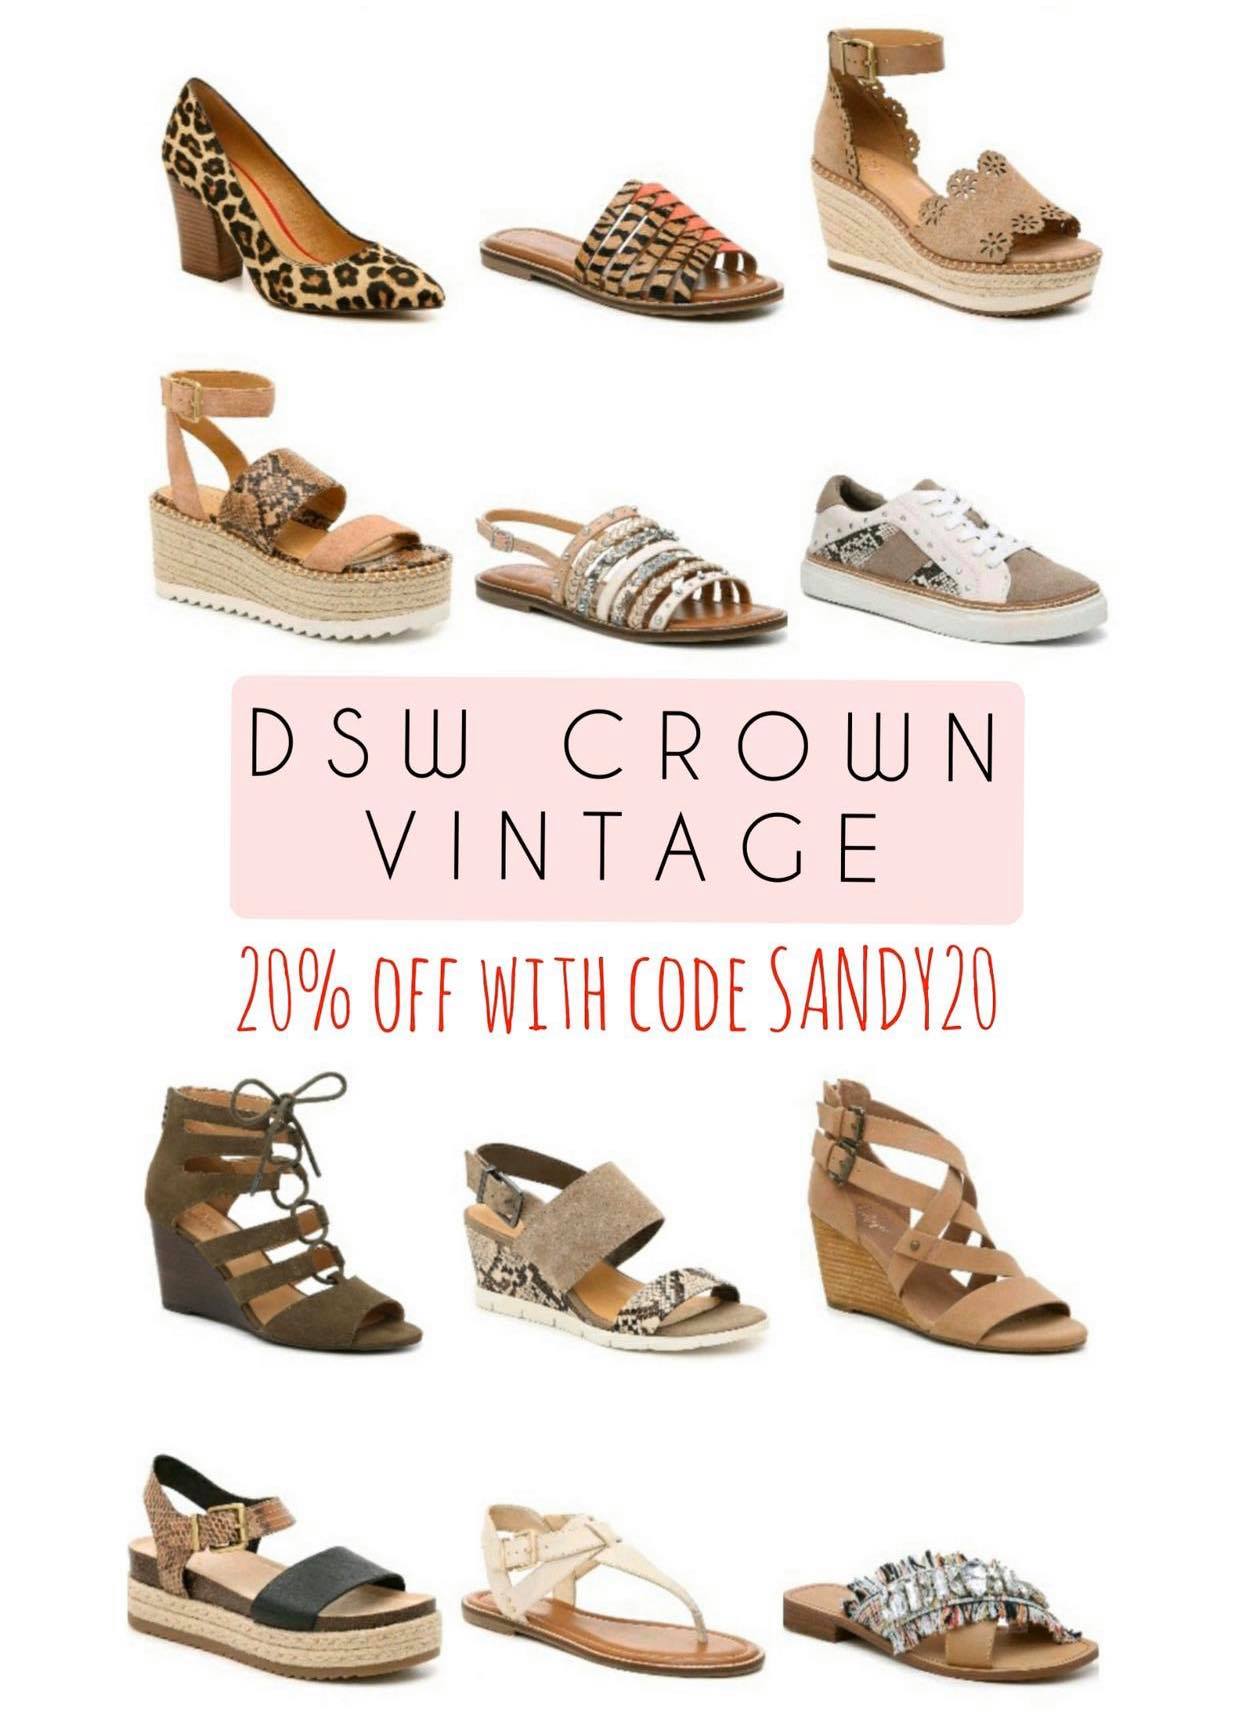 Summer Sandal Sale at DSW | The Cute Cache